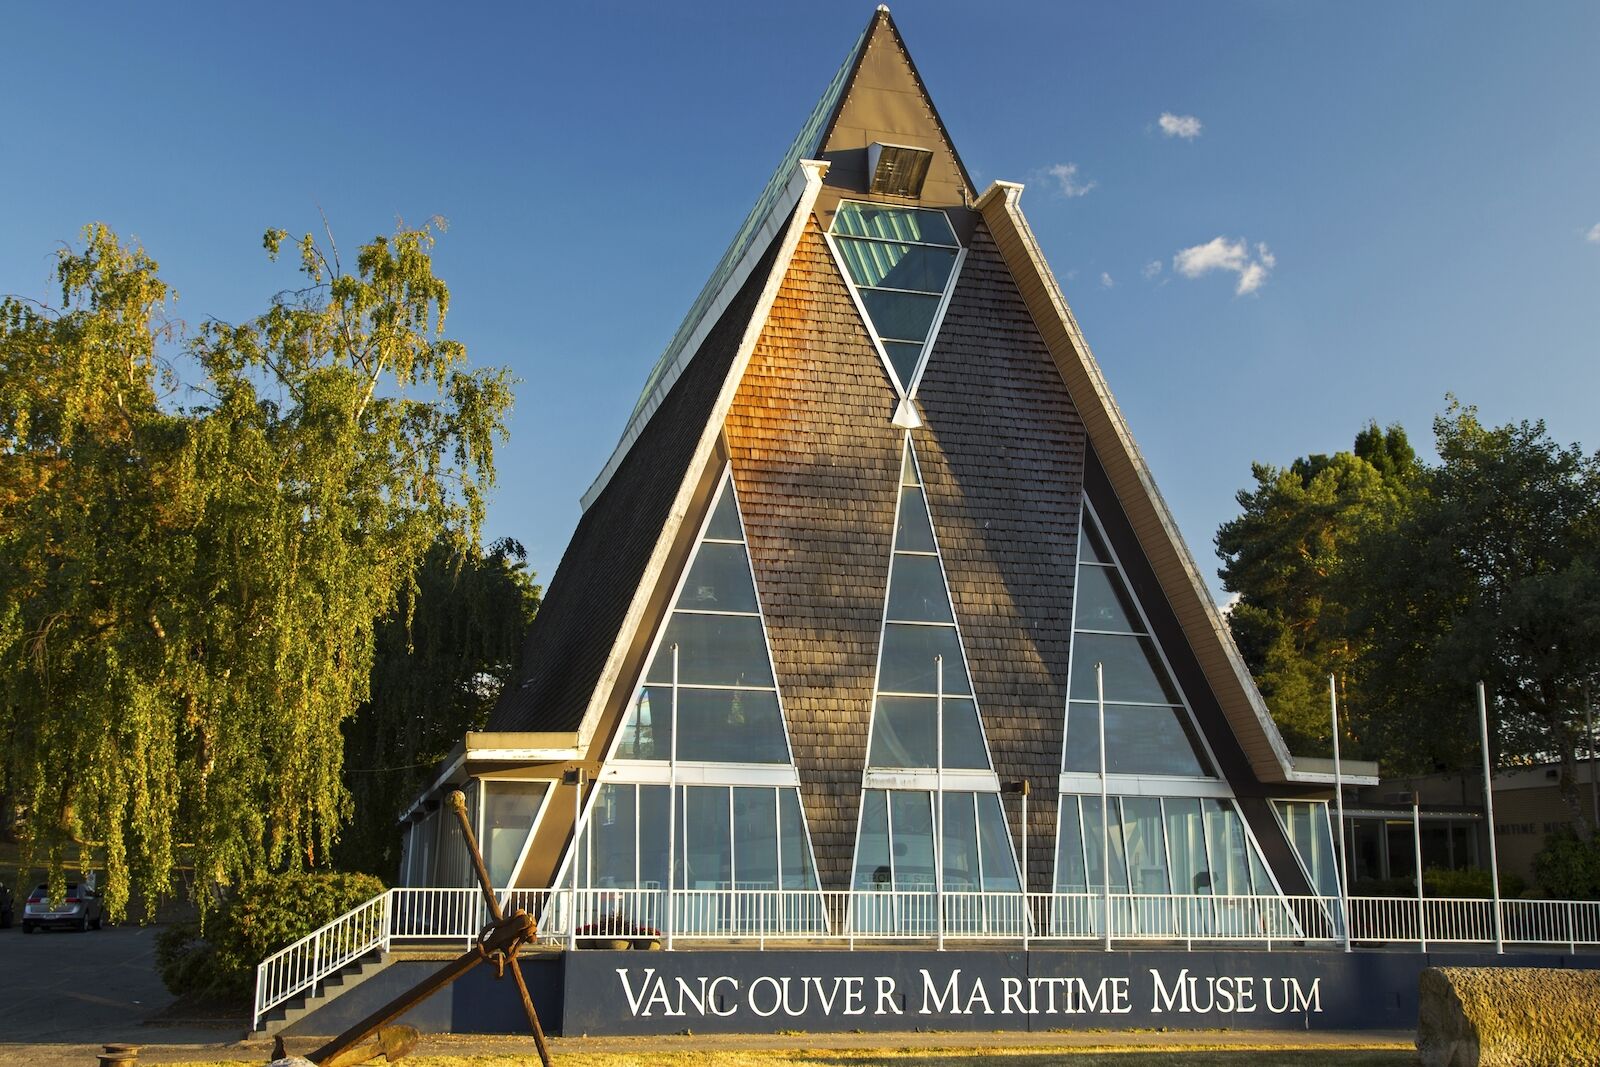 The Vancouver Maritime Museum, one of the best museums in Vancouver